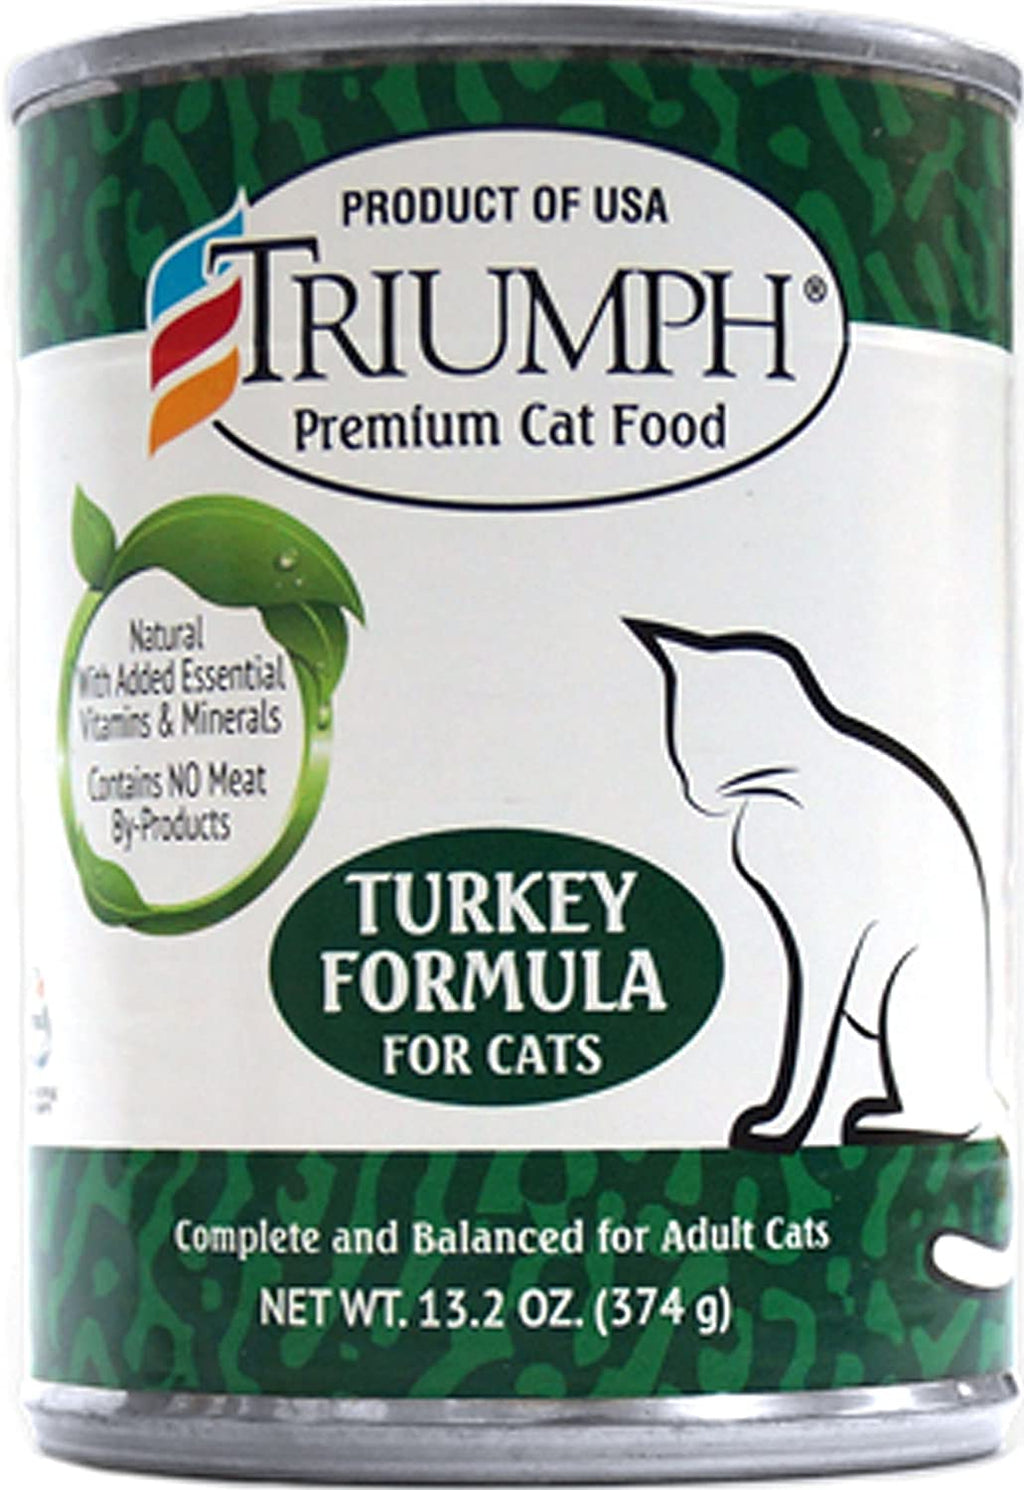 Triumph Natural Turkey Canned Cat Food - 13 oz - Case of 12  